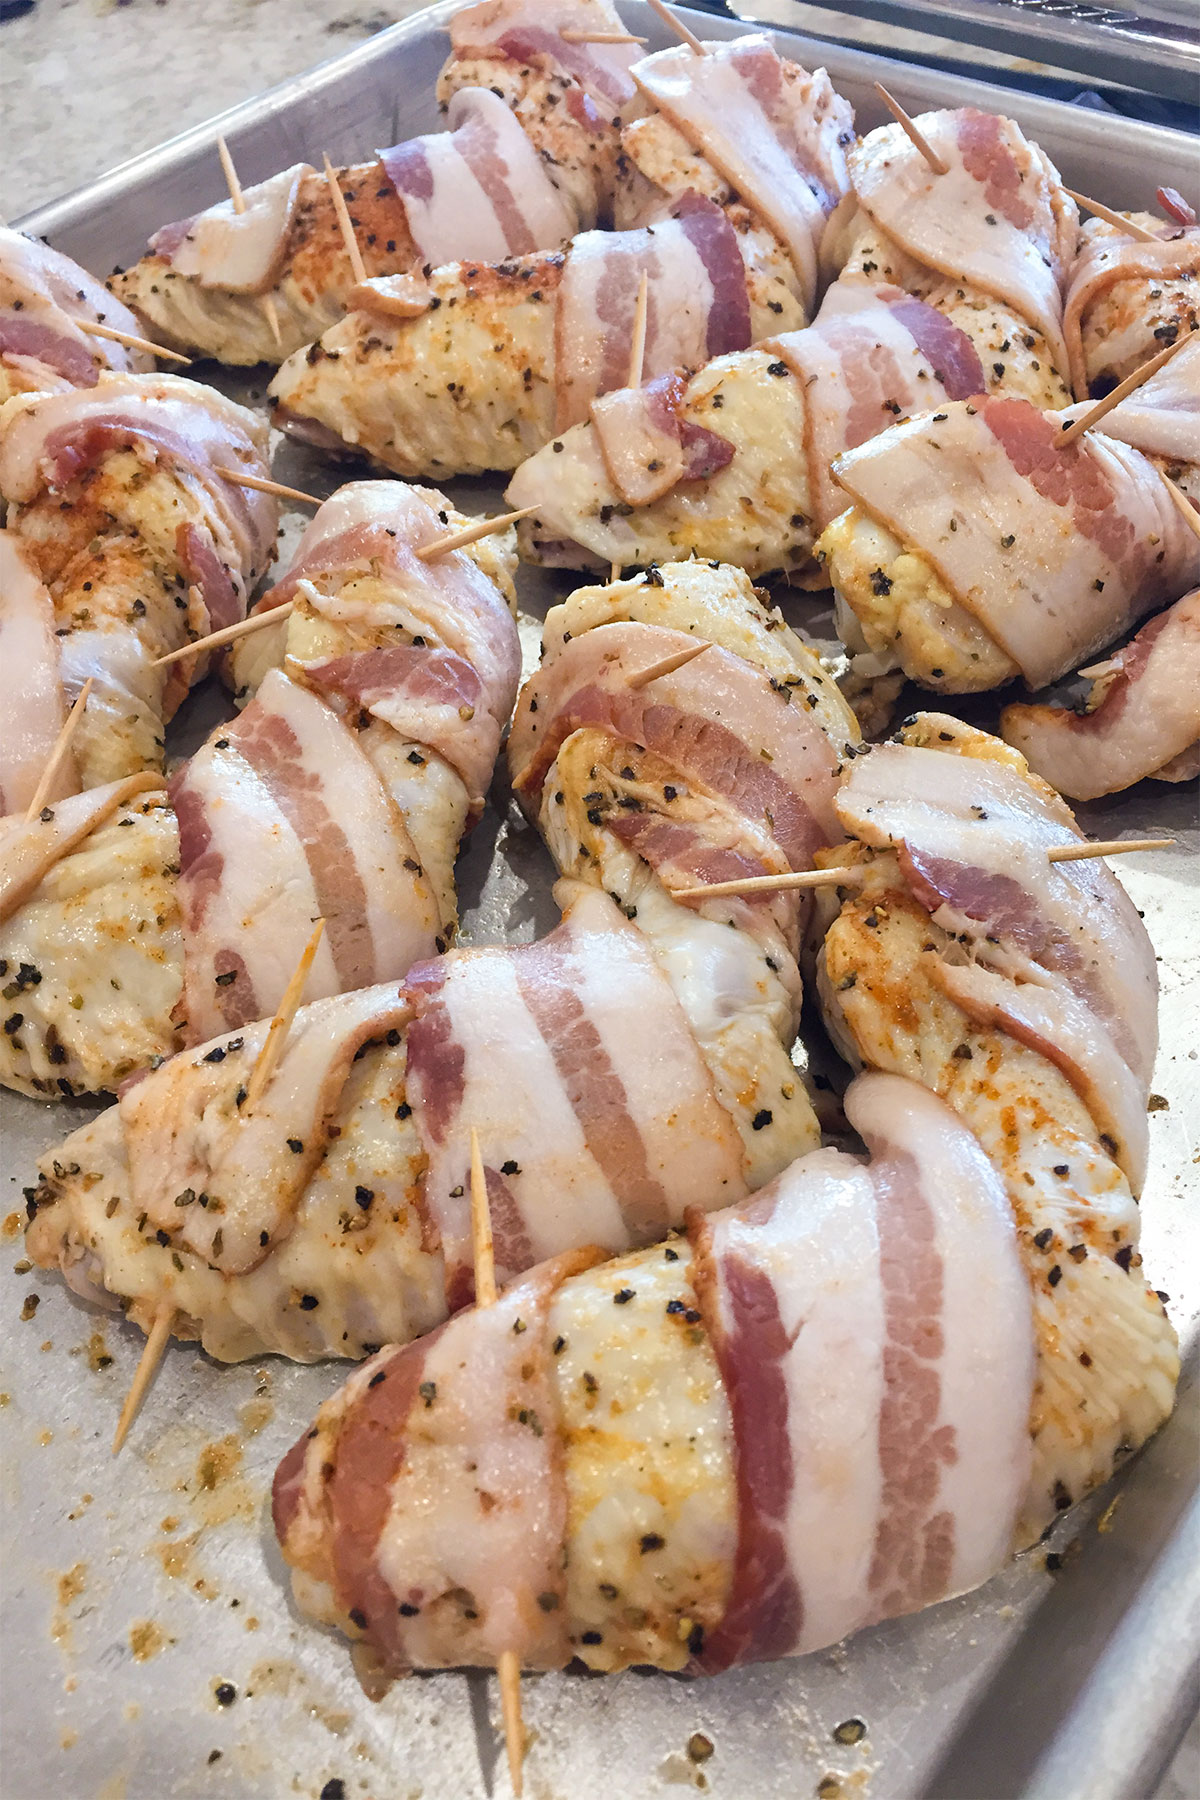 bacon wrapped around seasoned chicken wings secured with toothpicks.